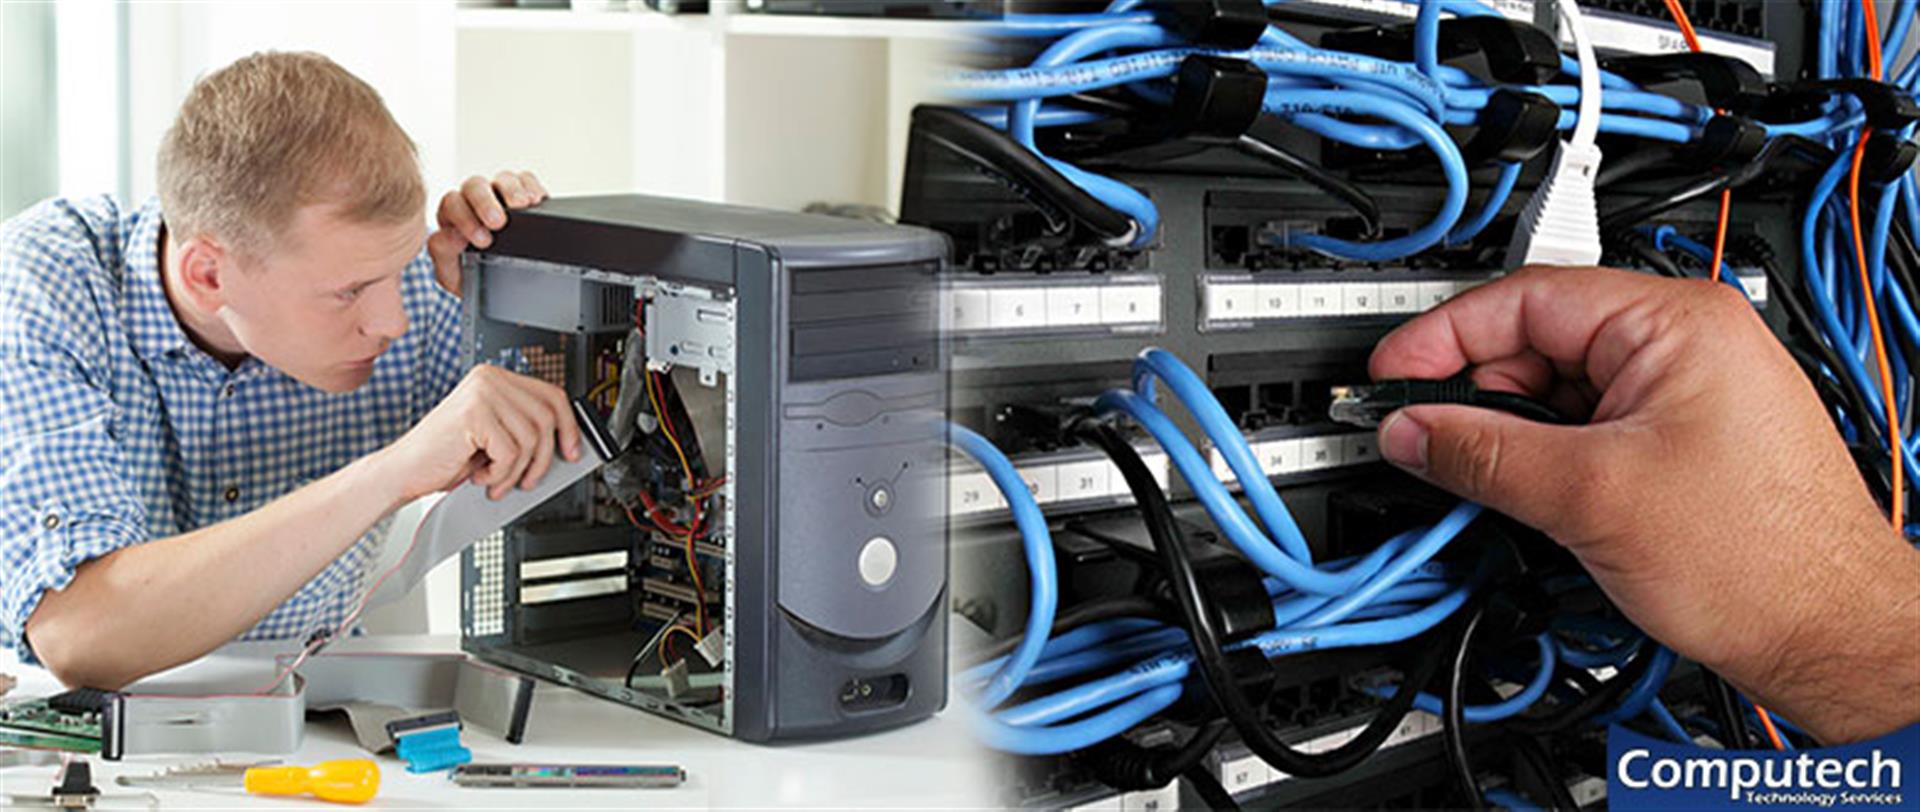 Lakesite Tennessee On-Site Computer and Printer Repairs, Networking, Voice & Data Cabling Services